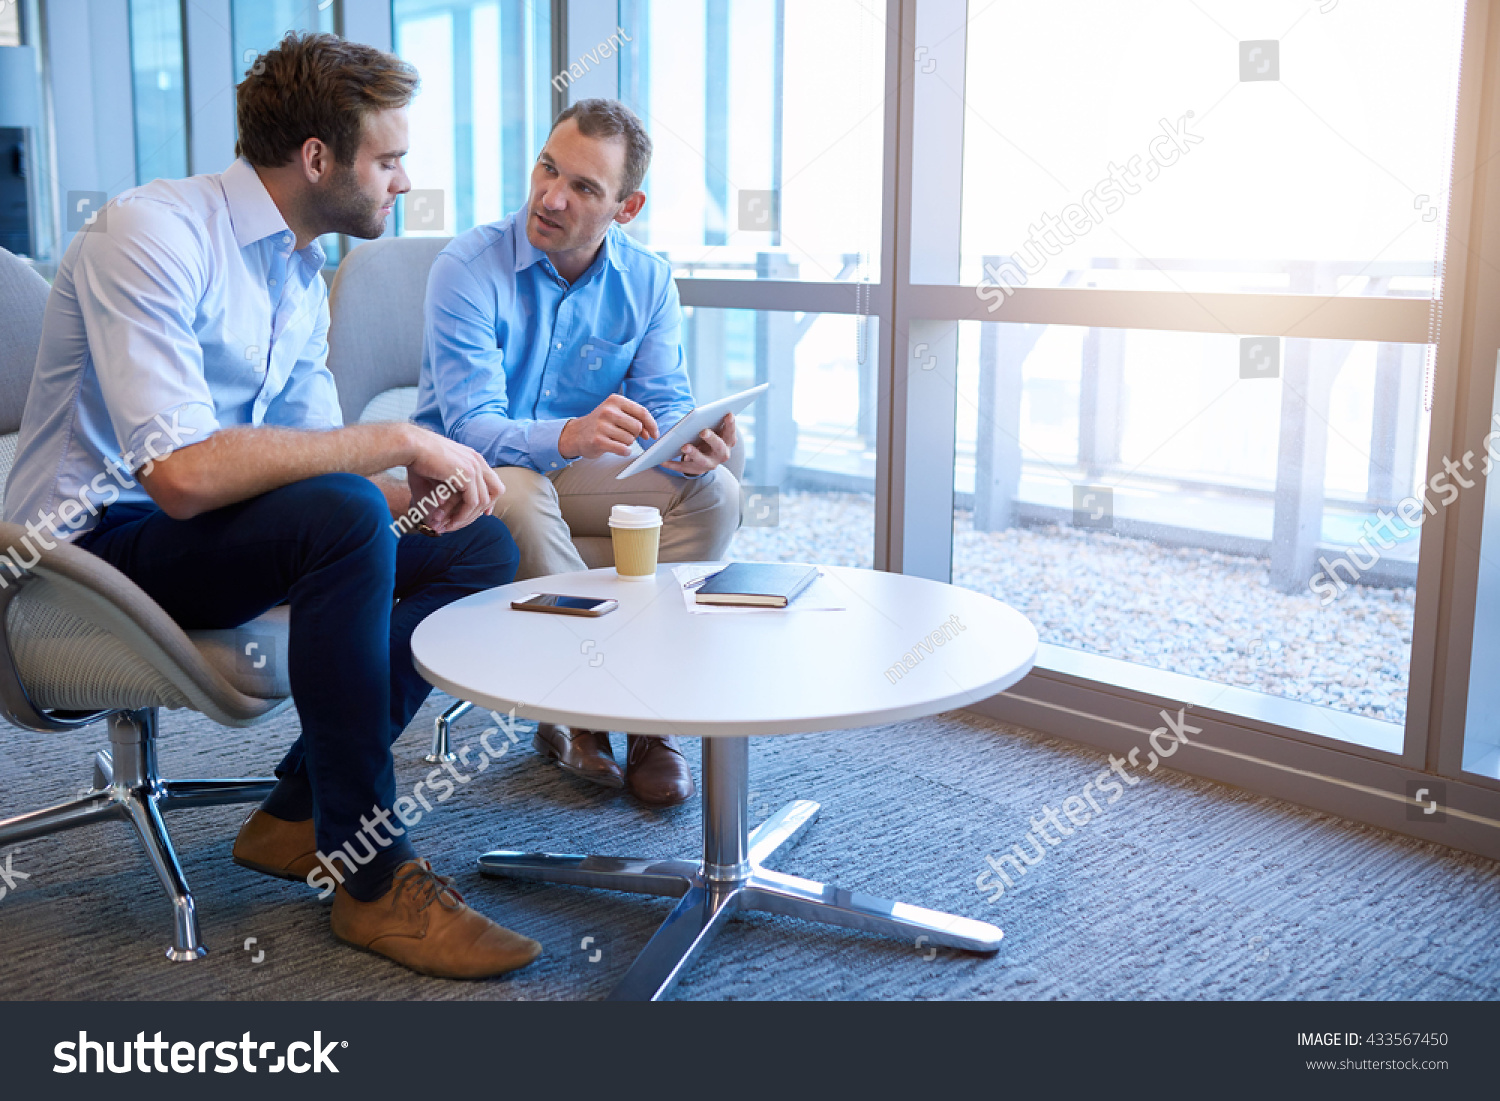 Handsome middle-aged business executive sitting with a younger coworker in a bright modern office, explaining some information to him on a digital tablet #433567450